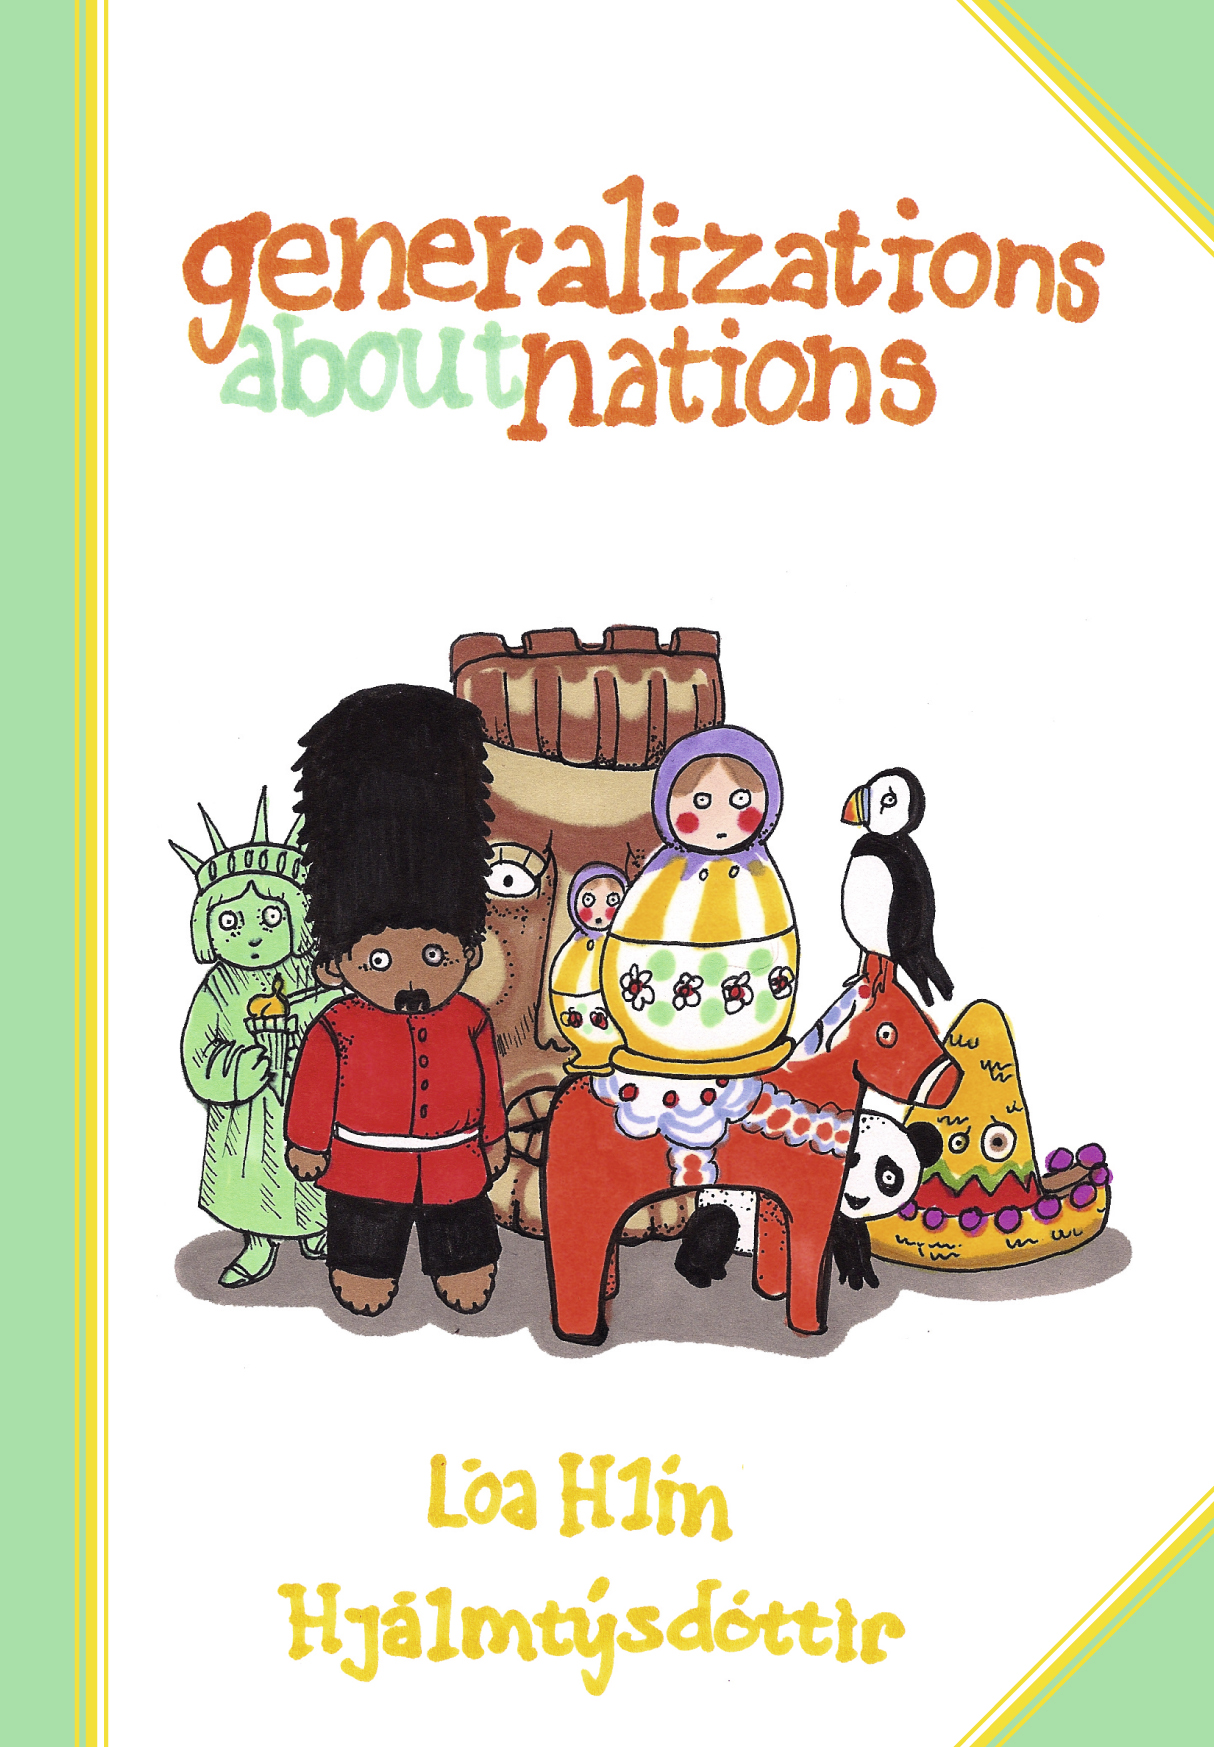 Generalizations about nations